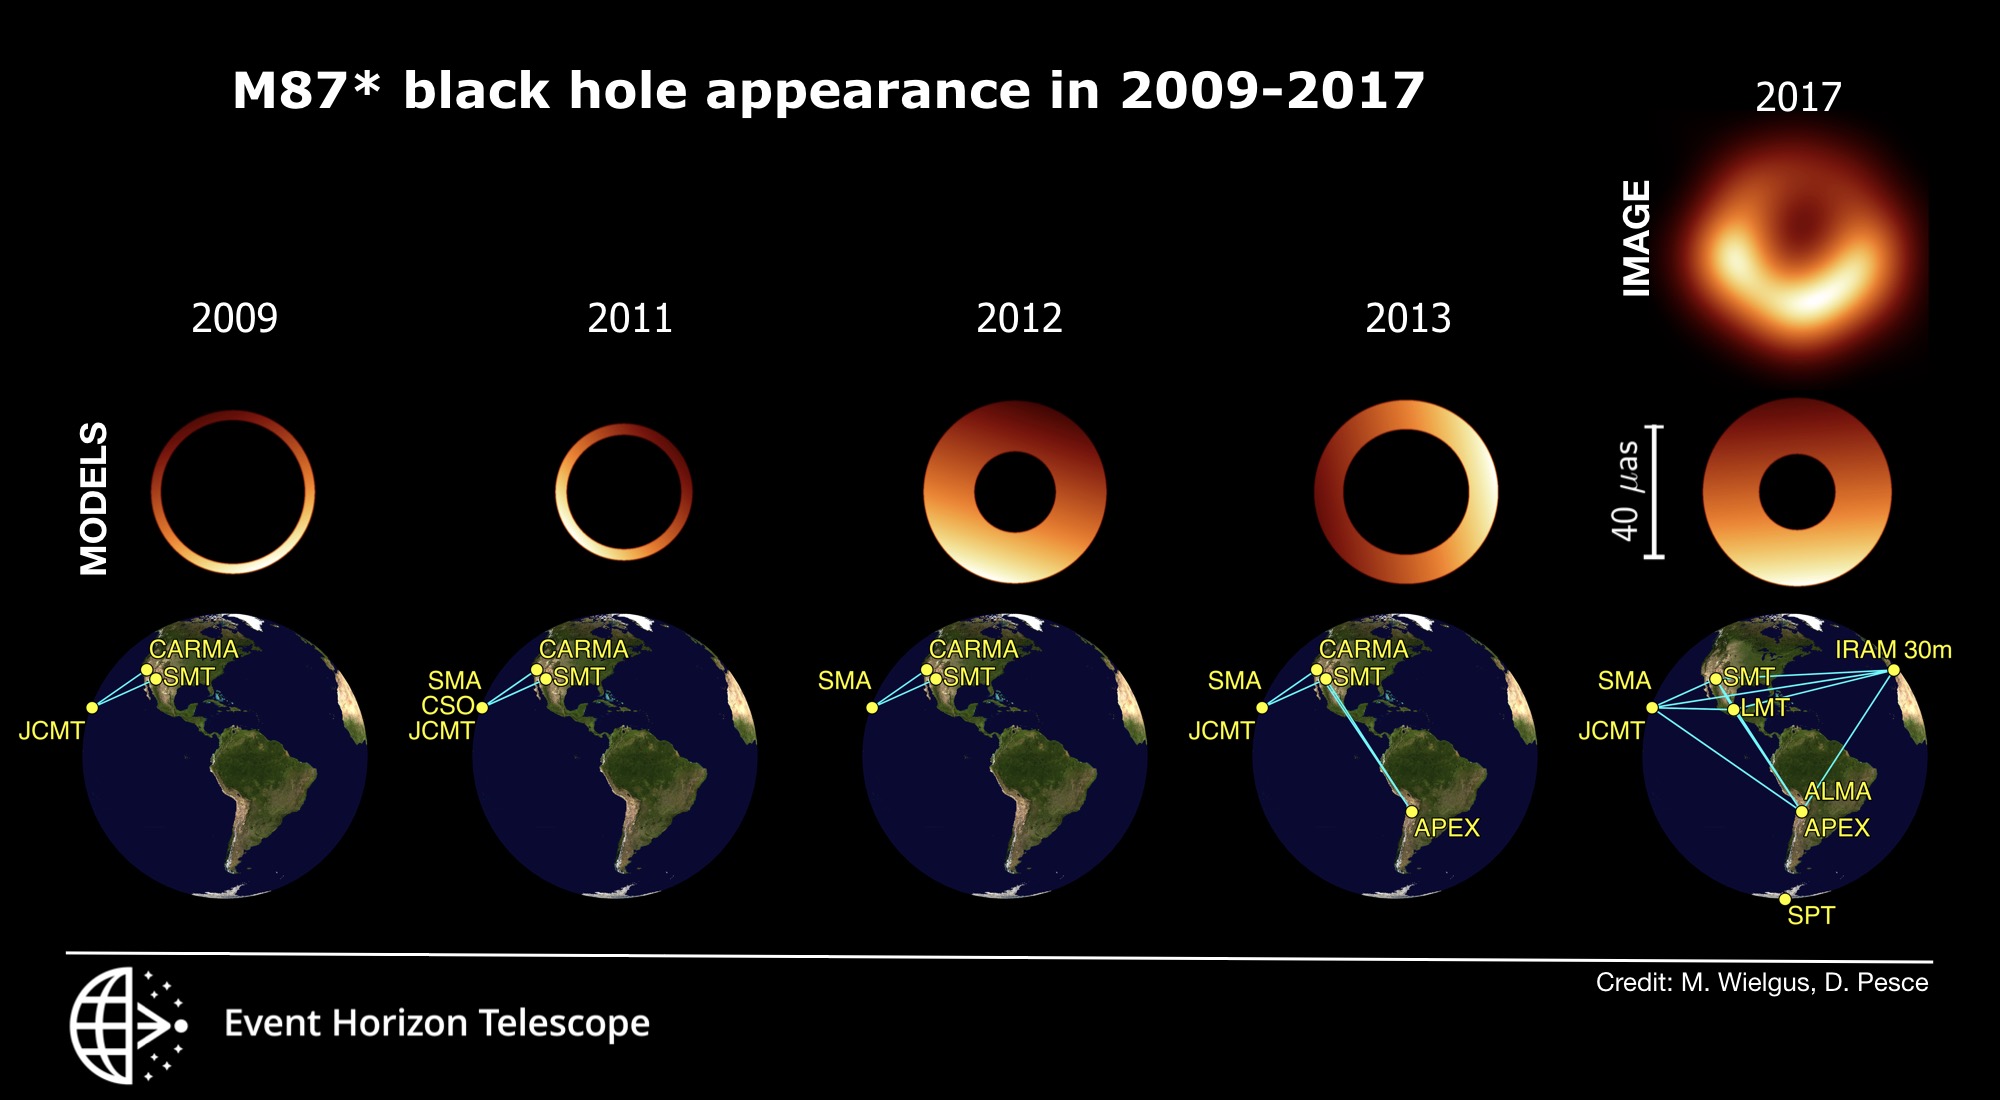 Snapshots of the M87* black hole obtained through imaging / geometric modeling, and the EHT array of telescopes in 2009-2017. The diameter of all rings is similar, but the location of the bright side varies.